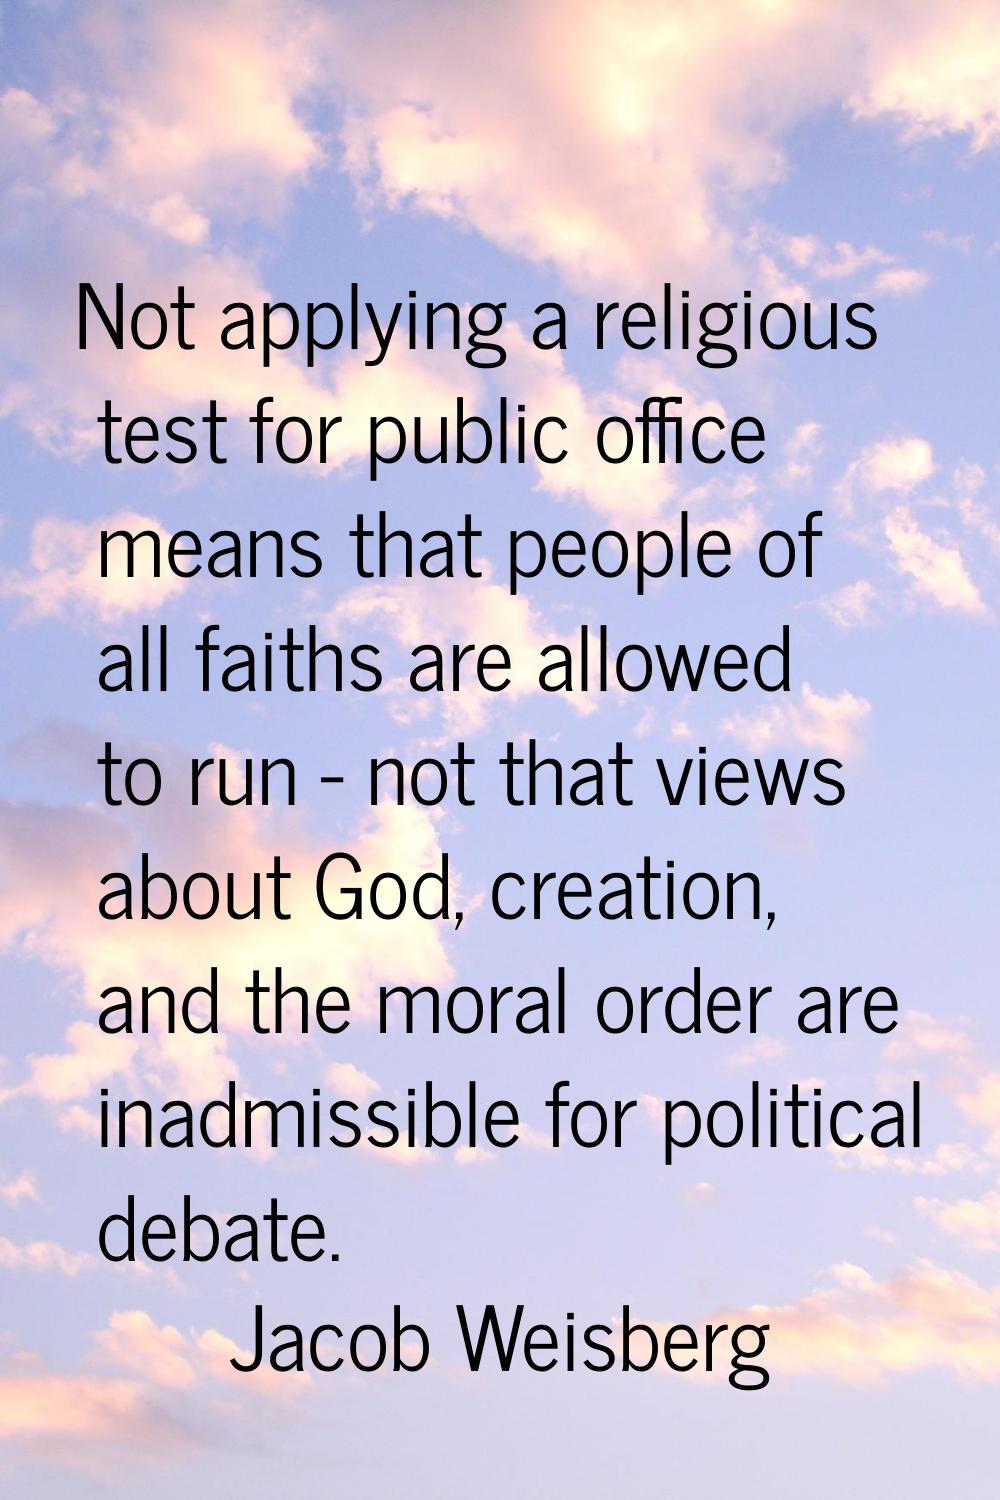 Not applying a religious test for public office means that people of all faiths are allowed to run 